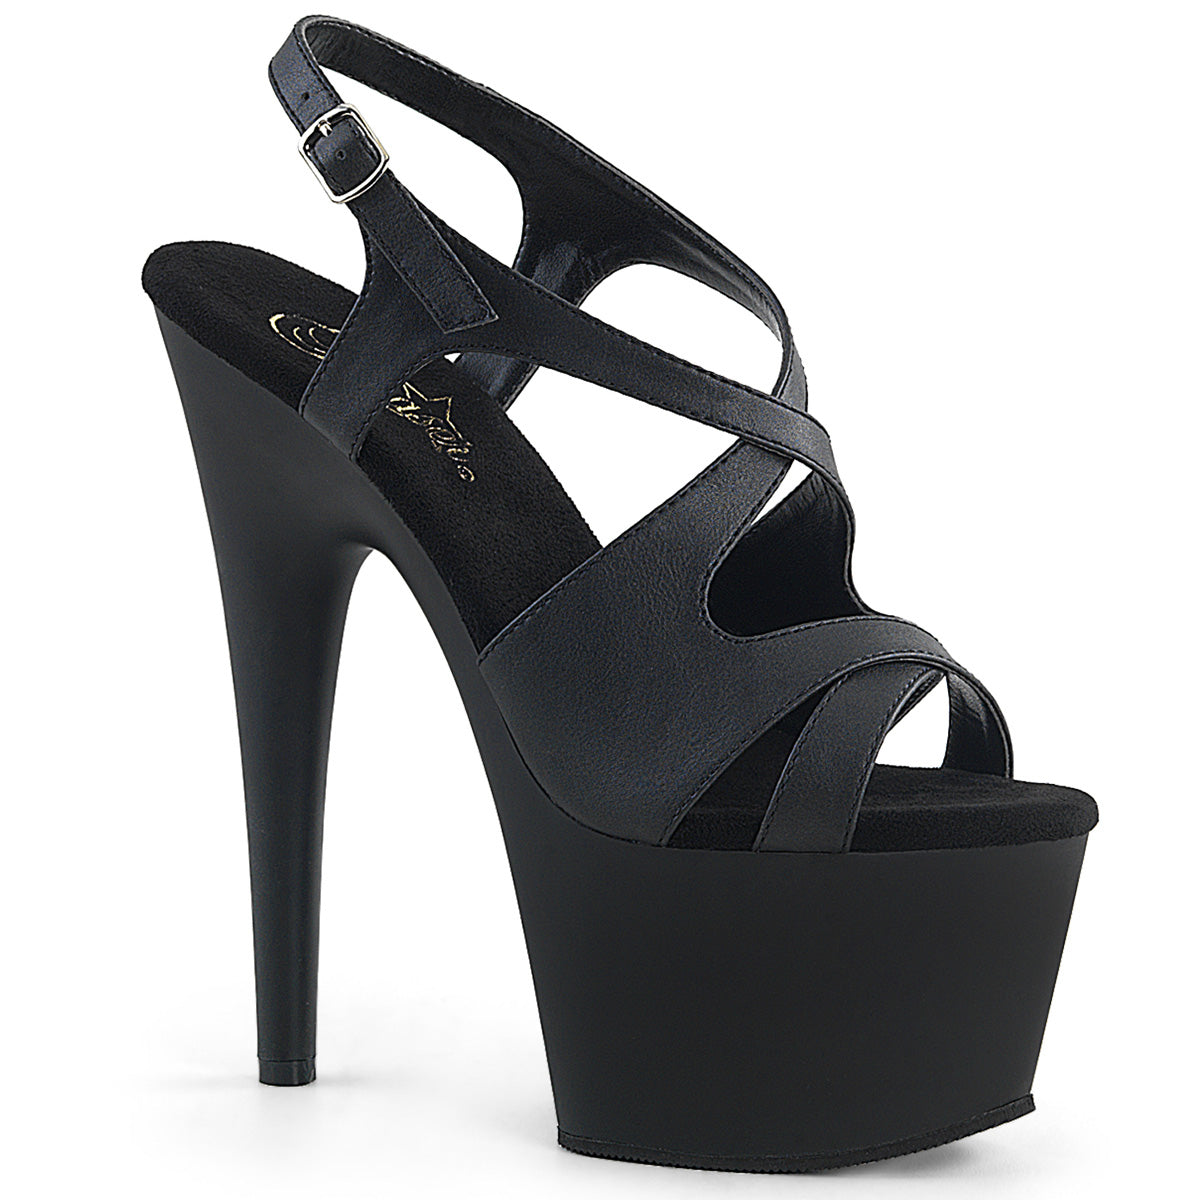 ADORE-730 Pleasers 7 Inch Black Stripper Strappy Slingback Heels